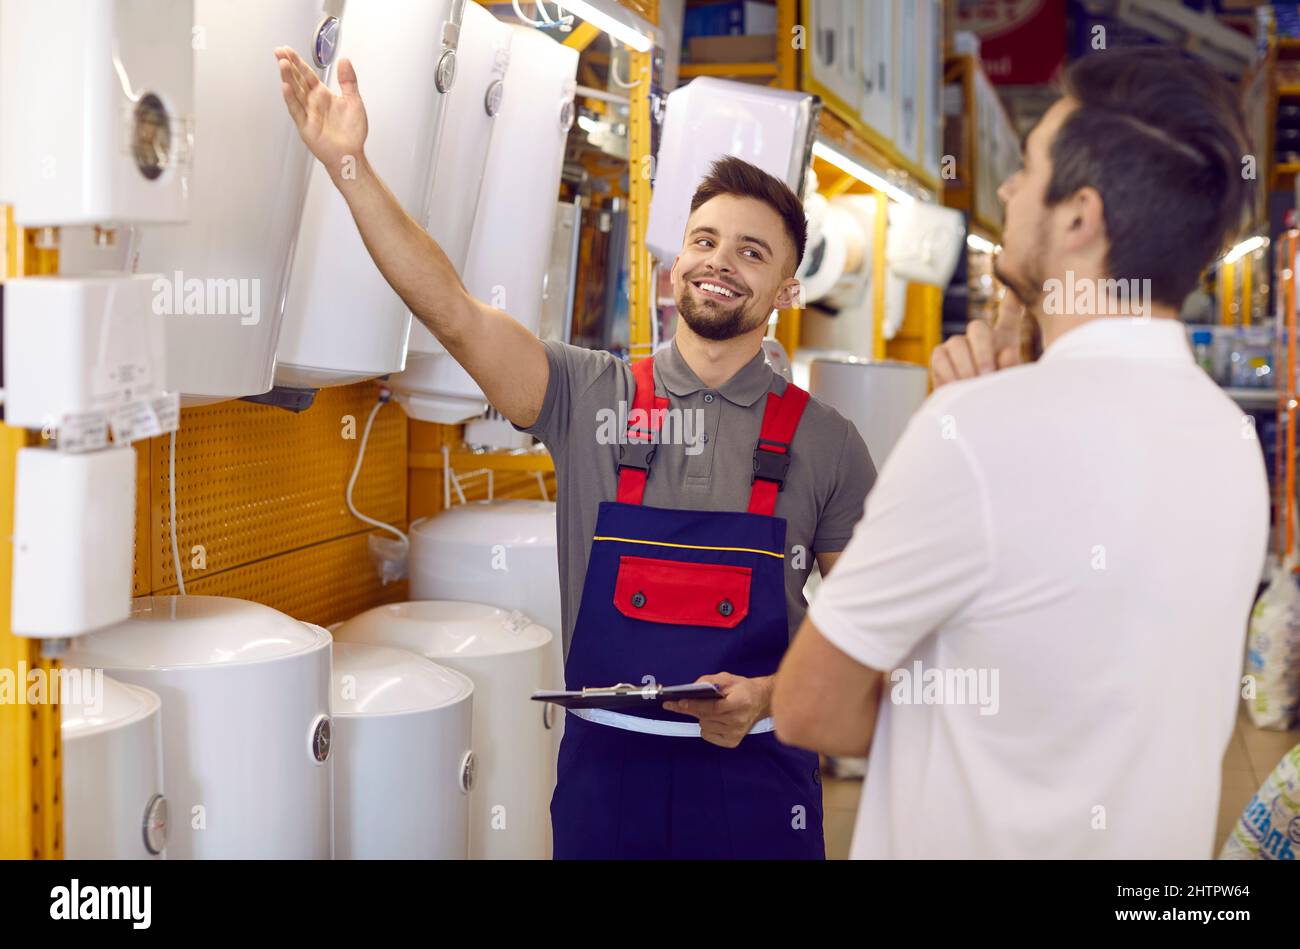 Smiling salesman showing a customer boilers and water heaters they have at the store Stock Photo